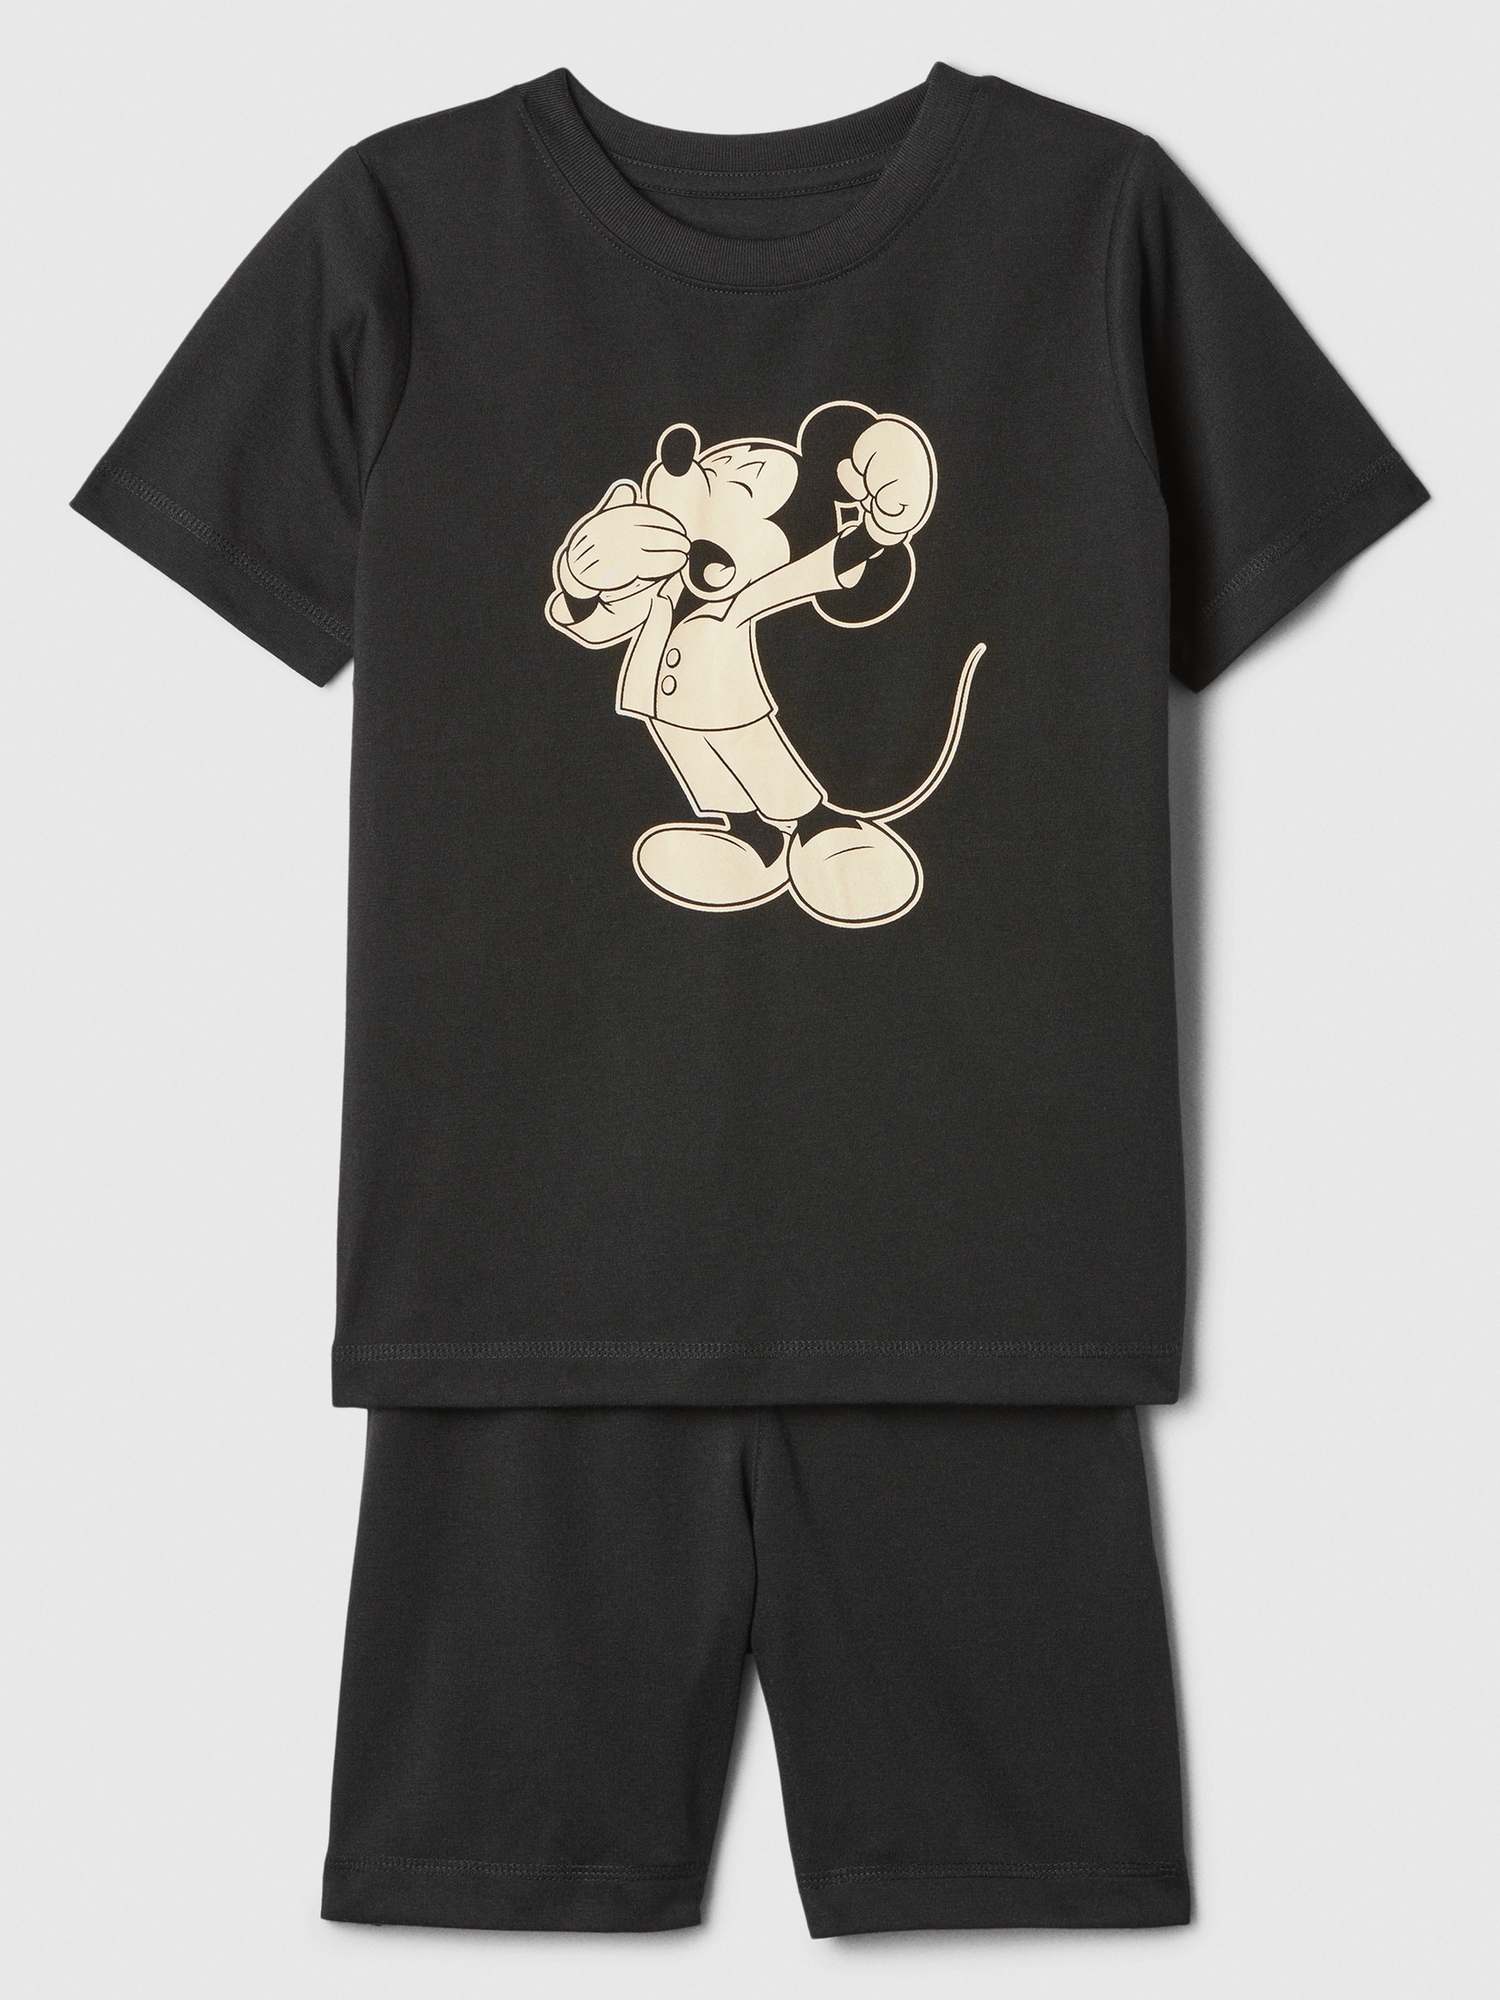 Mickey Mouse Shirts